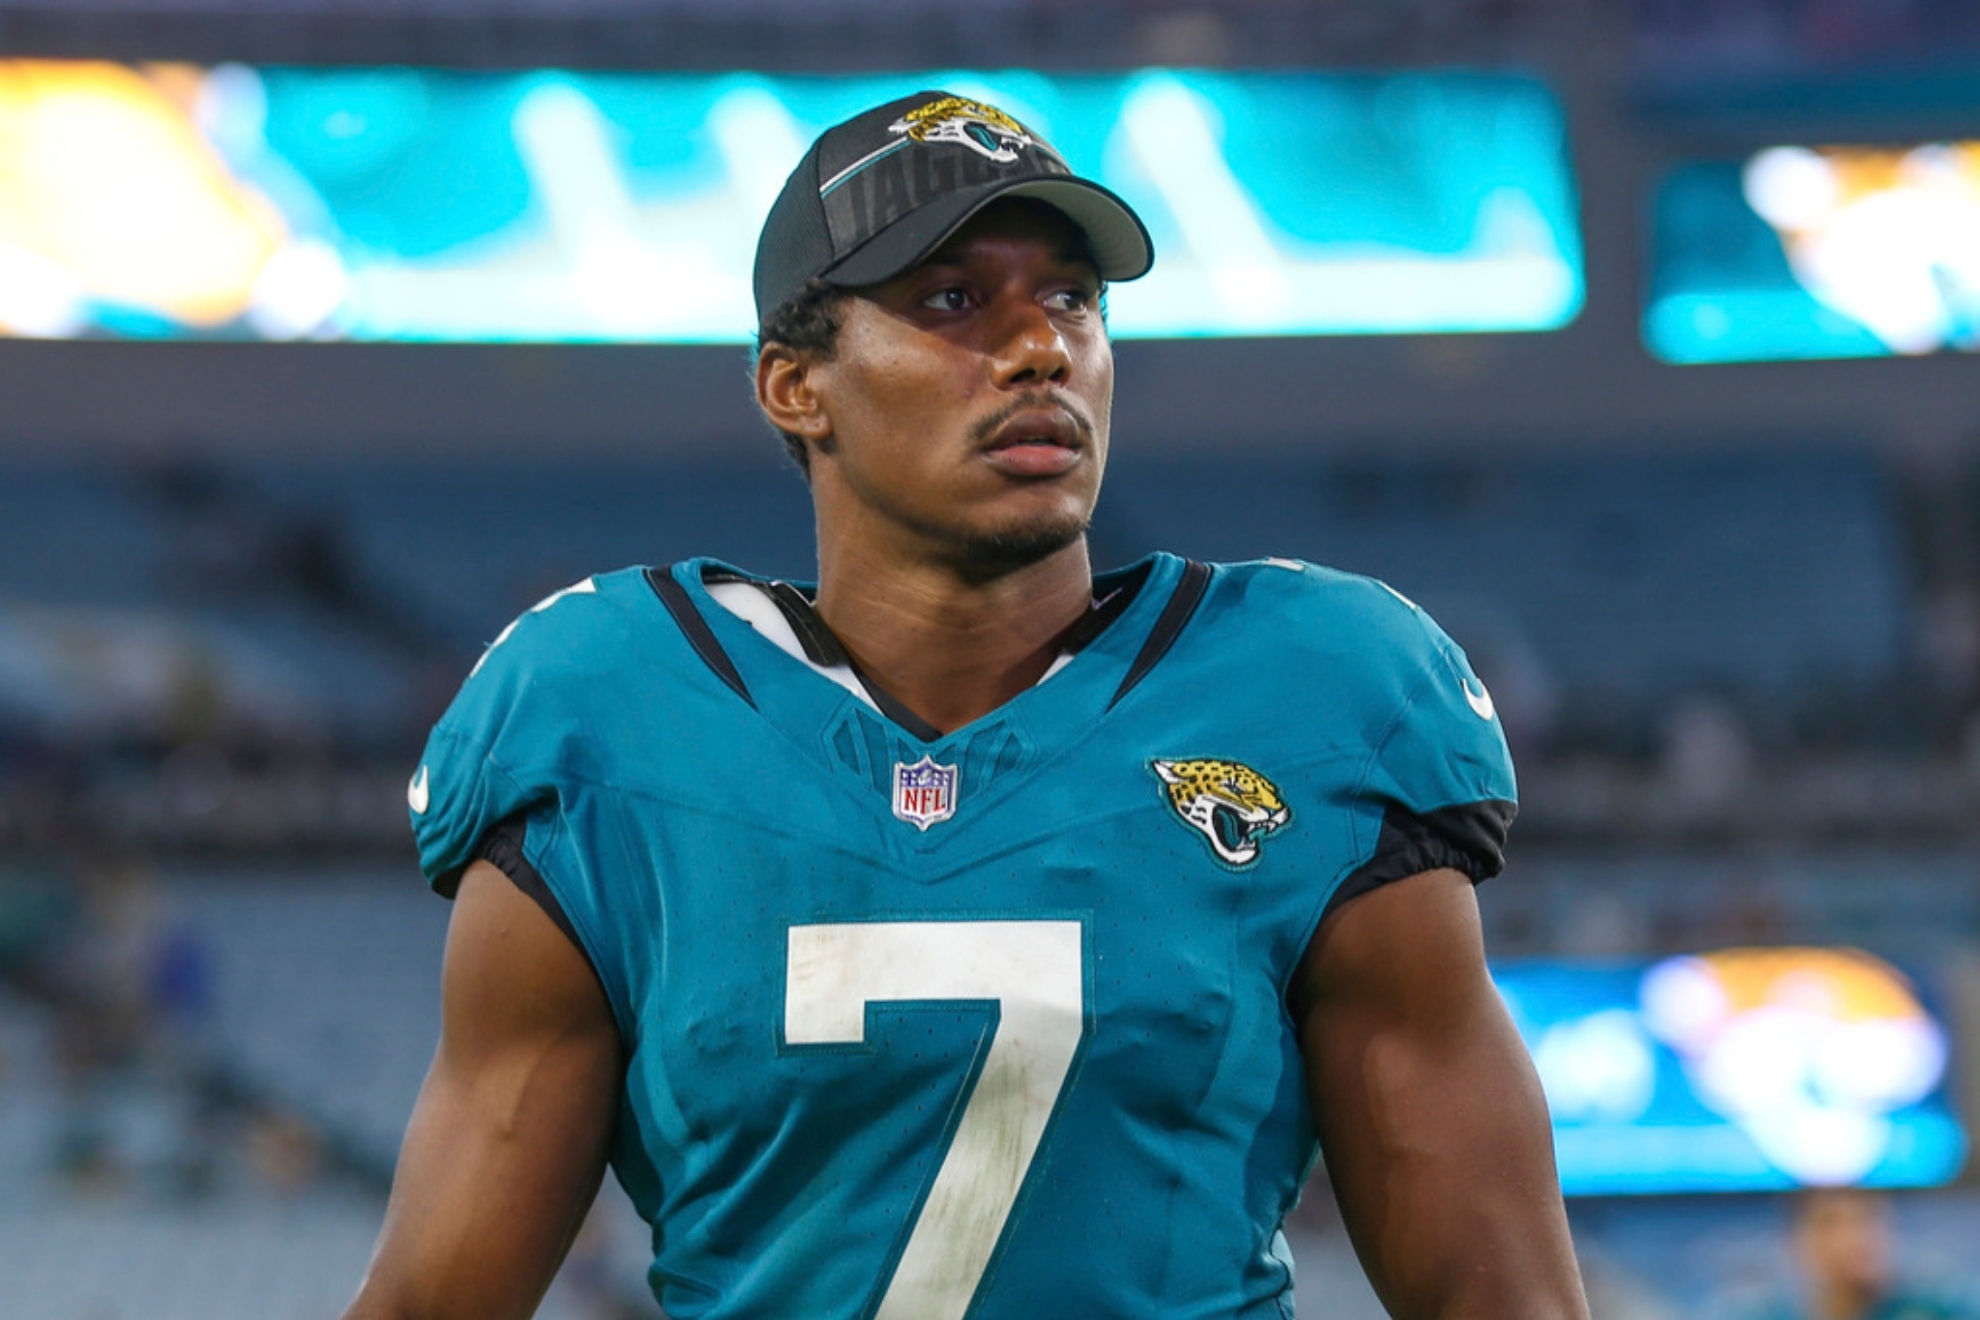 Jones has had a limited role in the Jags offense this season